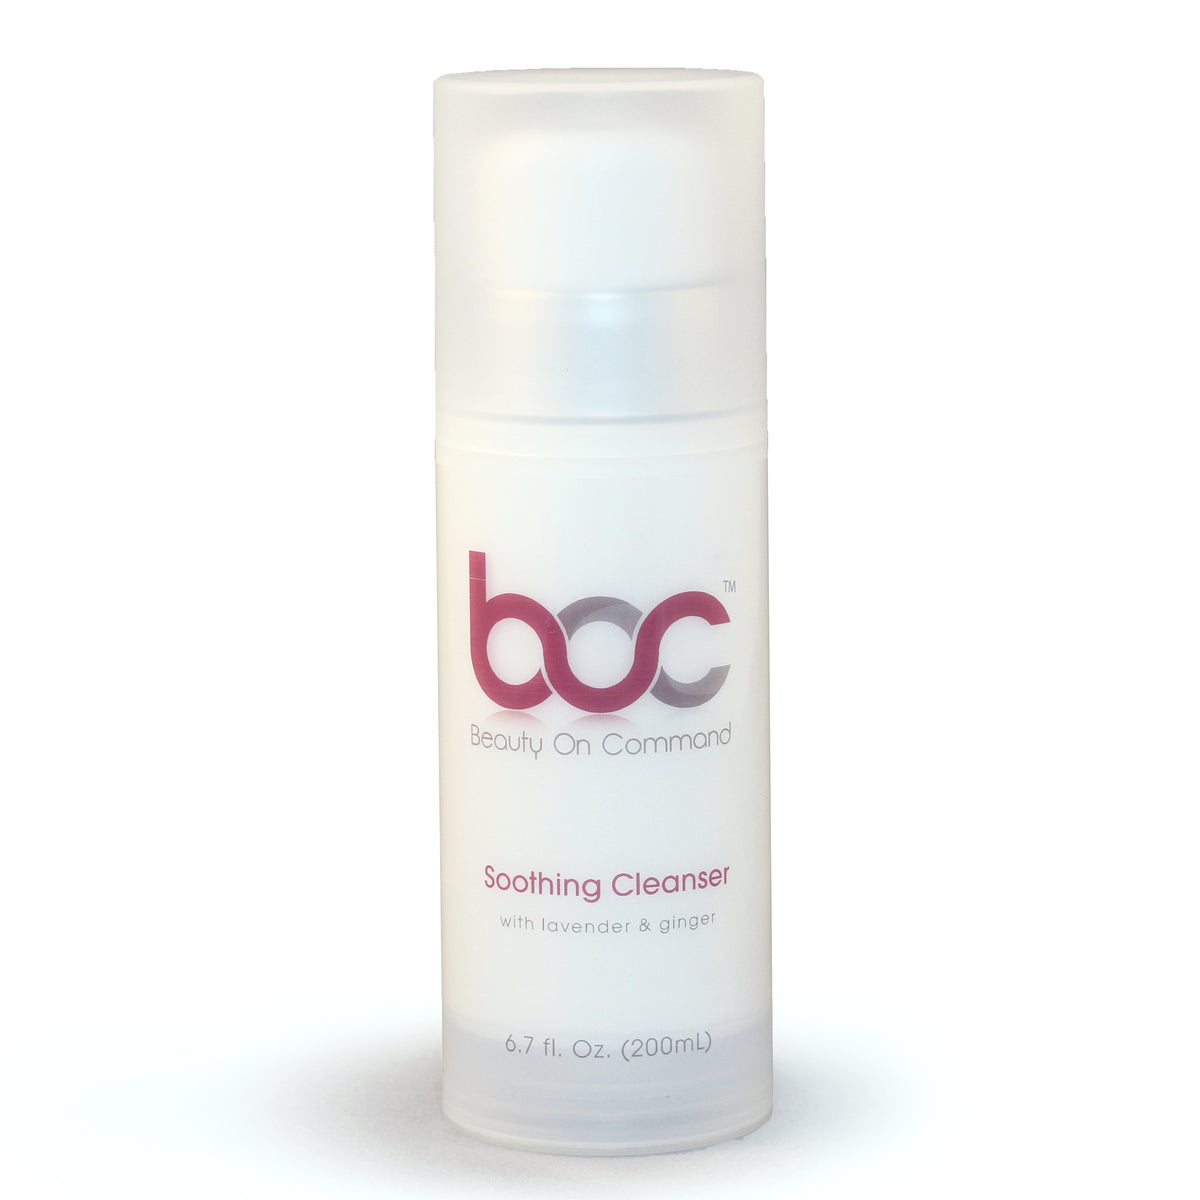 Soothing Cleanser - BeautyOnCommand